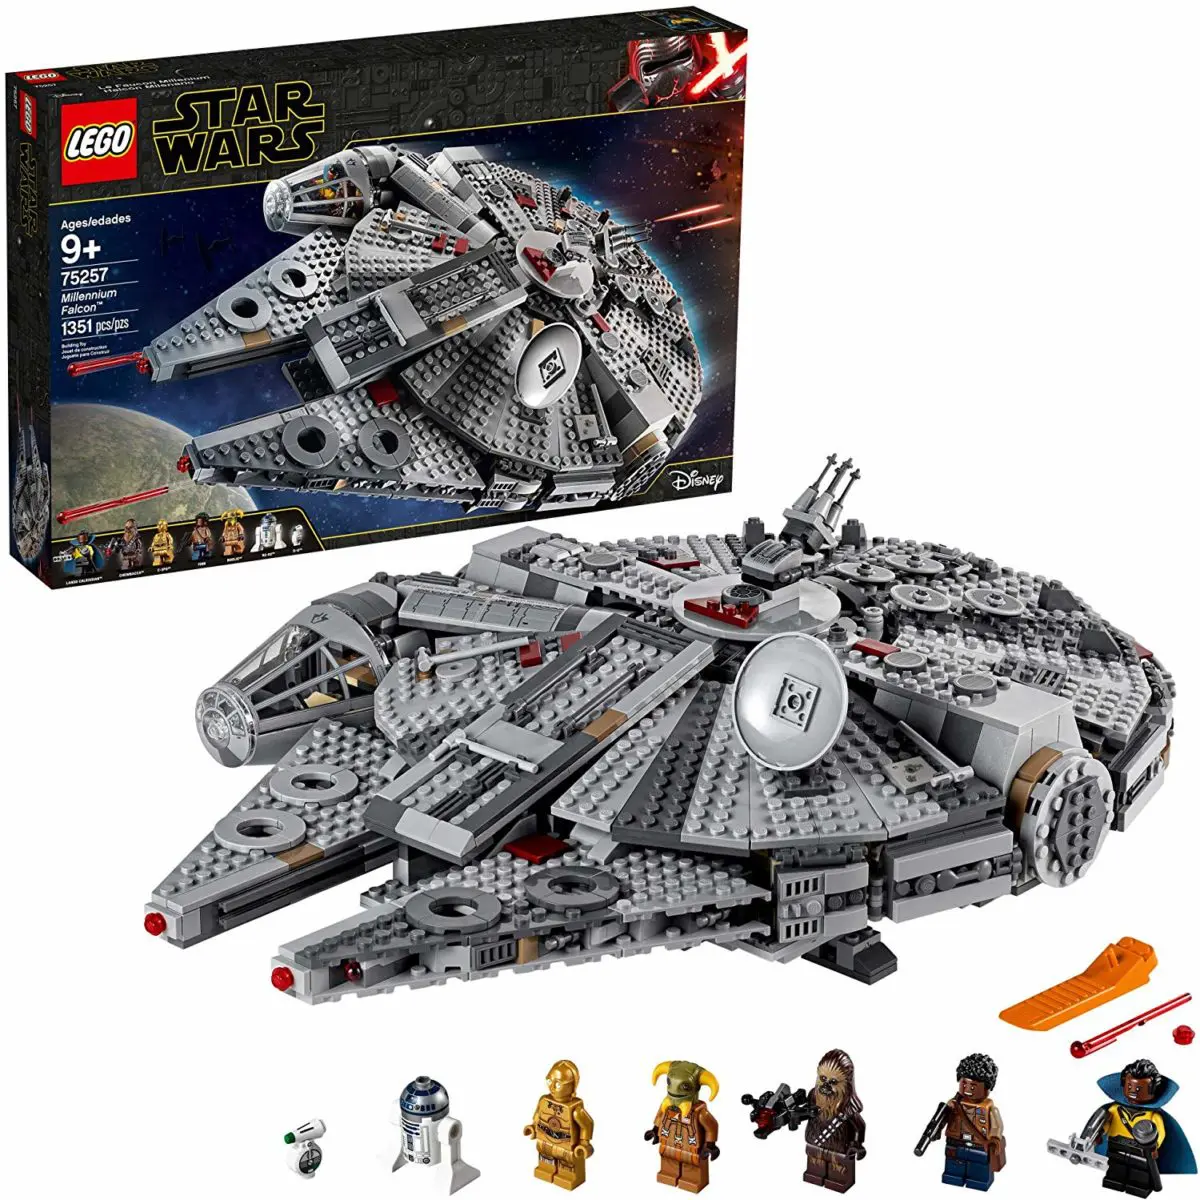 LEGO Star Wars The Rise of Skywalker Millennium Falcon - Top Toys and Gifts for Six Year Old Boys 1